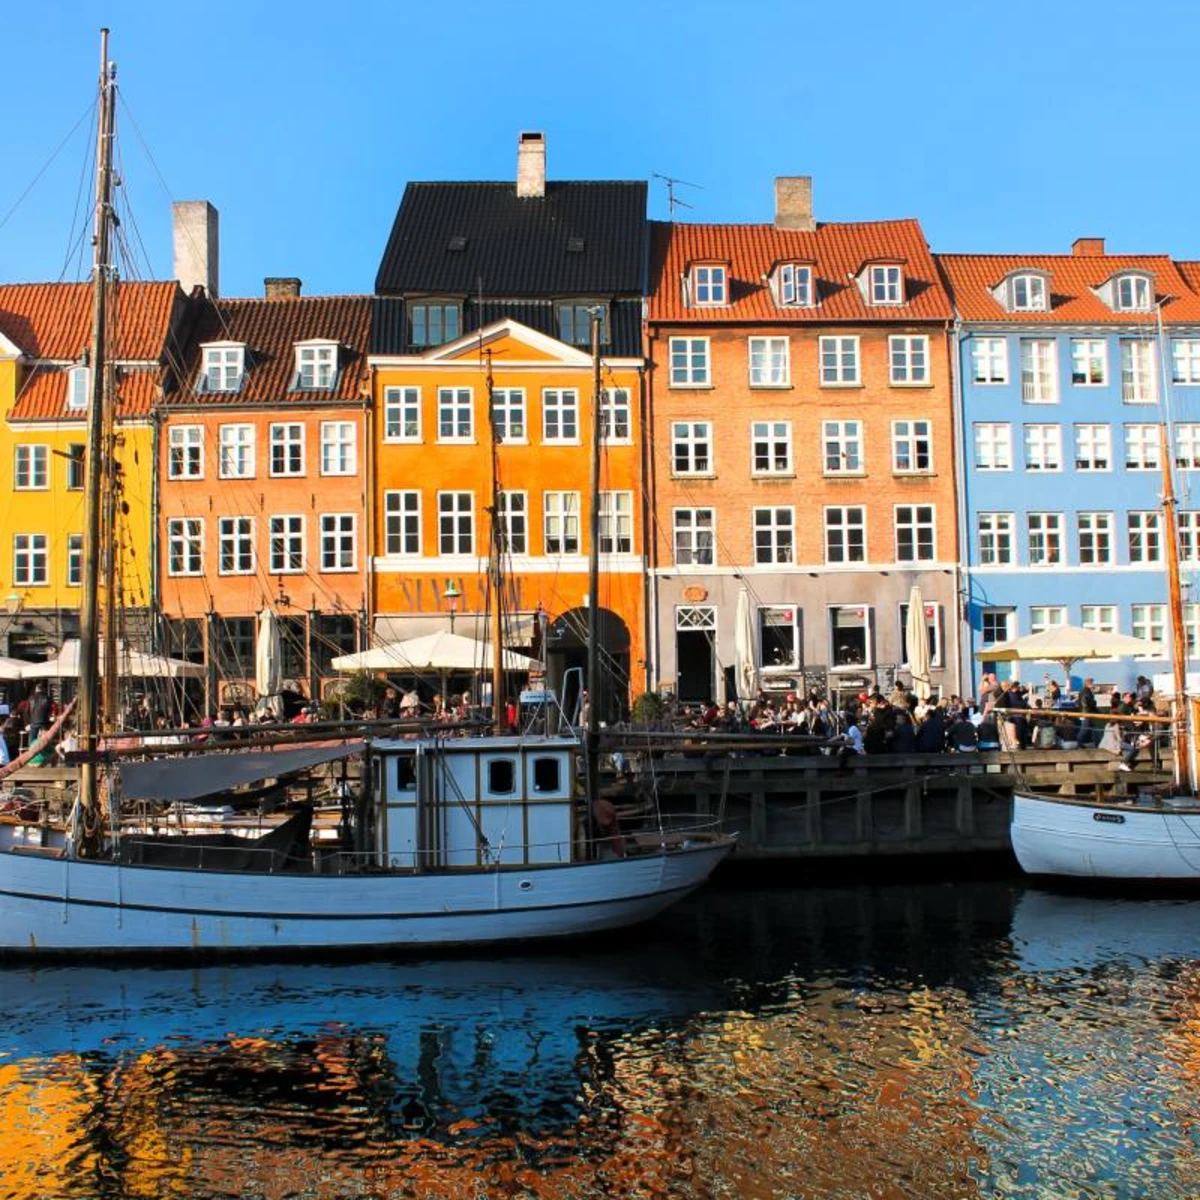 Sailboats in the water with colorful buildings in the background in Denmark